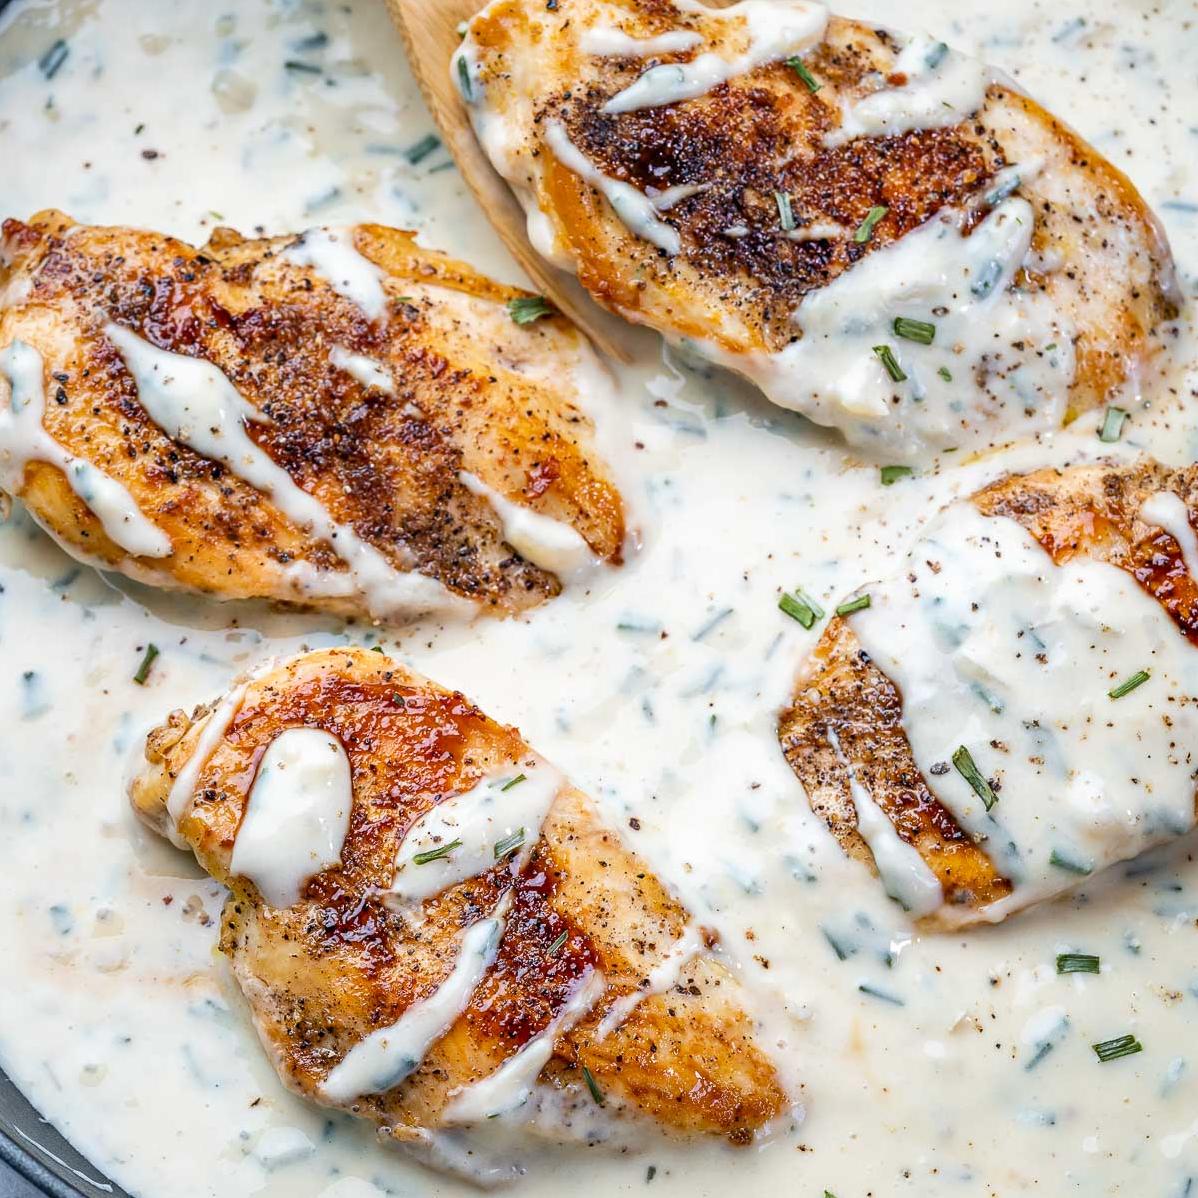  Impress your dinner guests with this restaurant-worthy chicken and white wine sauce.